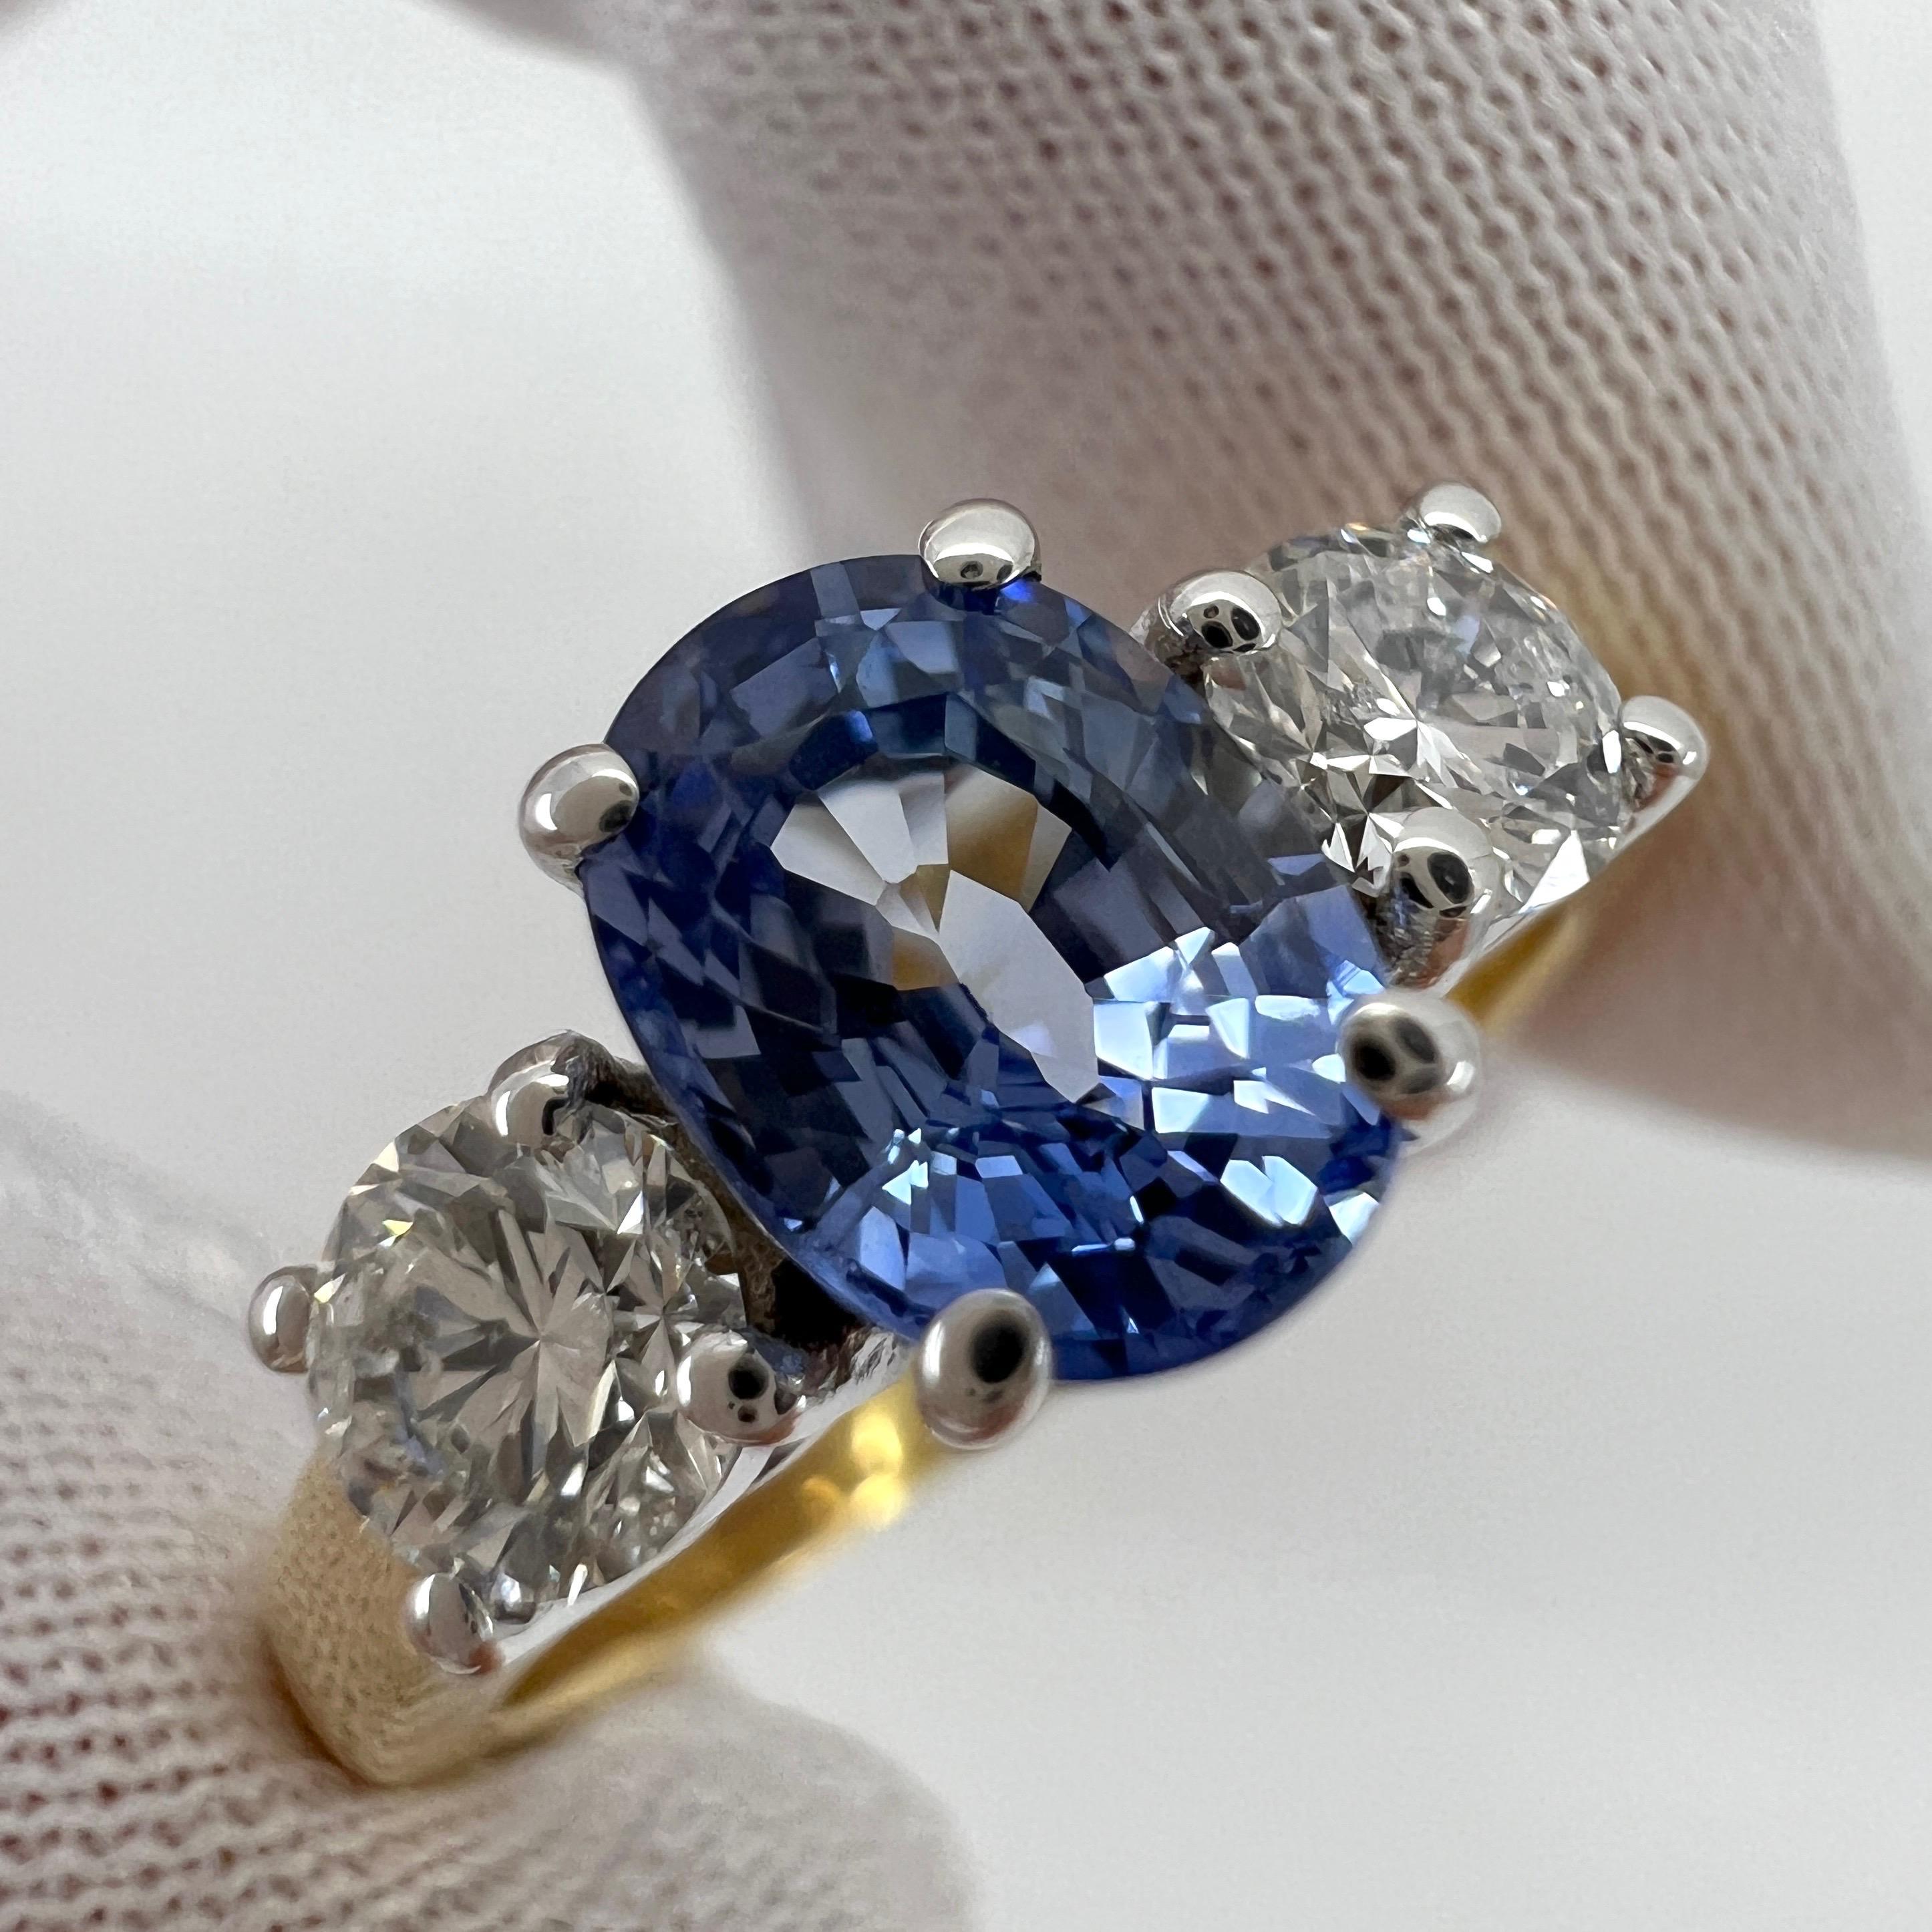 Fine Vivid Blue Oval Cut Ceylon Sapphire & Diamond Three Stone 18k Gold Ring. 1.78 Total Carat Weight.

Fine colour Ceylon blue oval cut sapphire centre stone. 1.28 Carat measuring 7x5mm. This sapphire has an excellent oval cut and excellent clarity